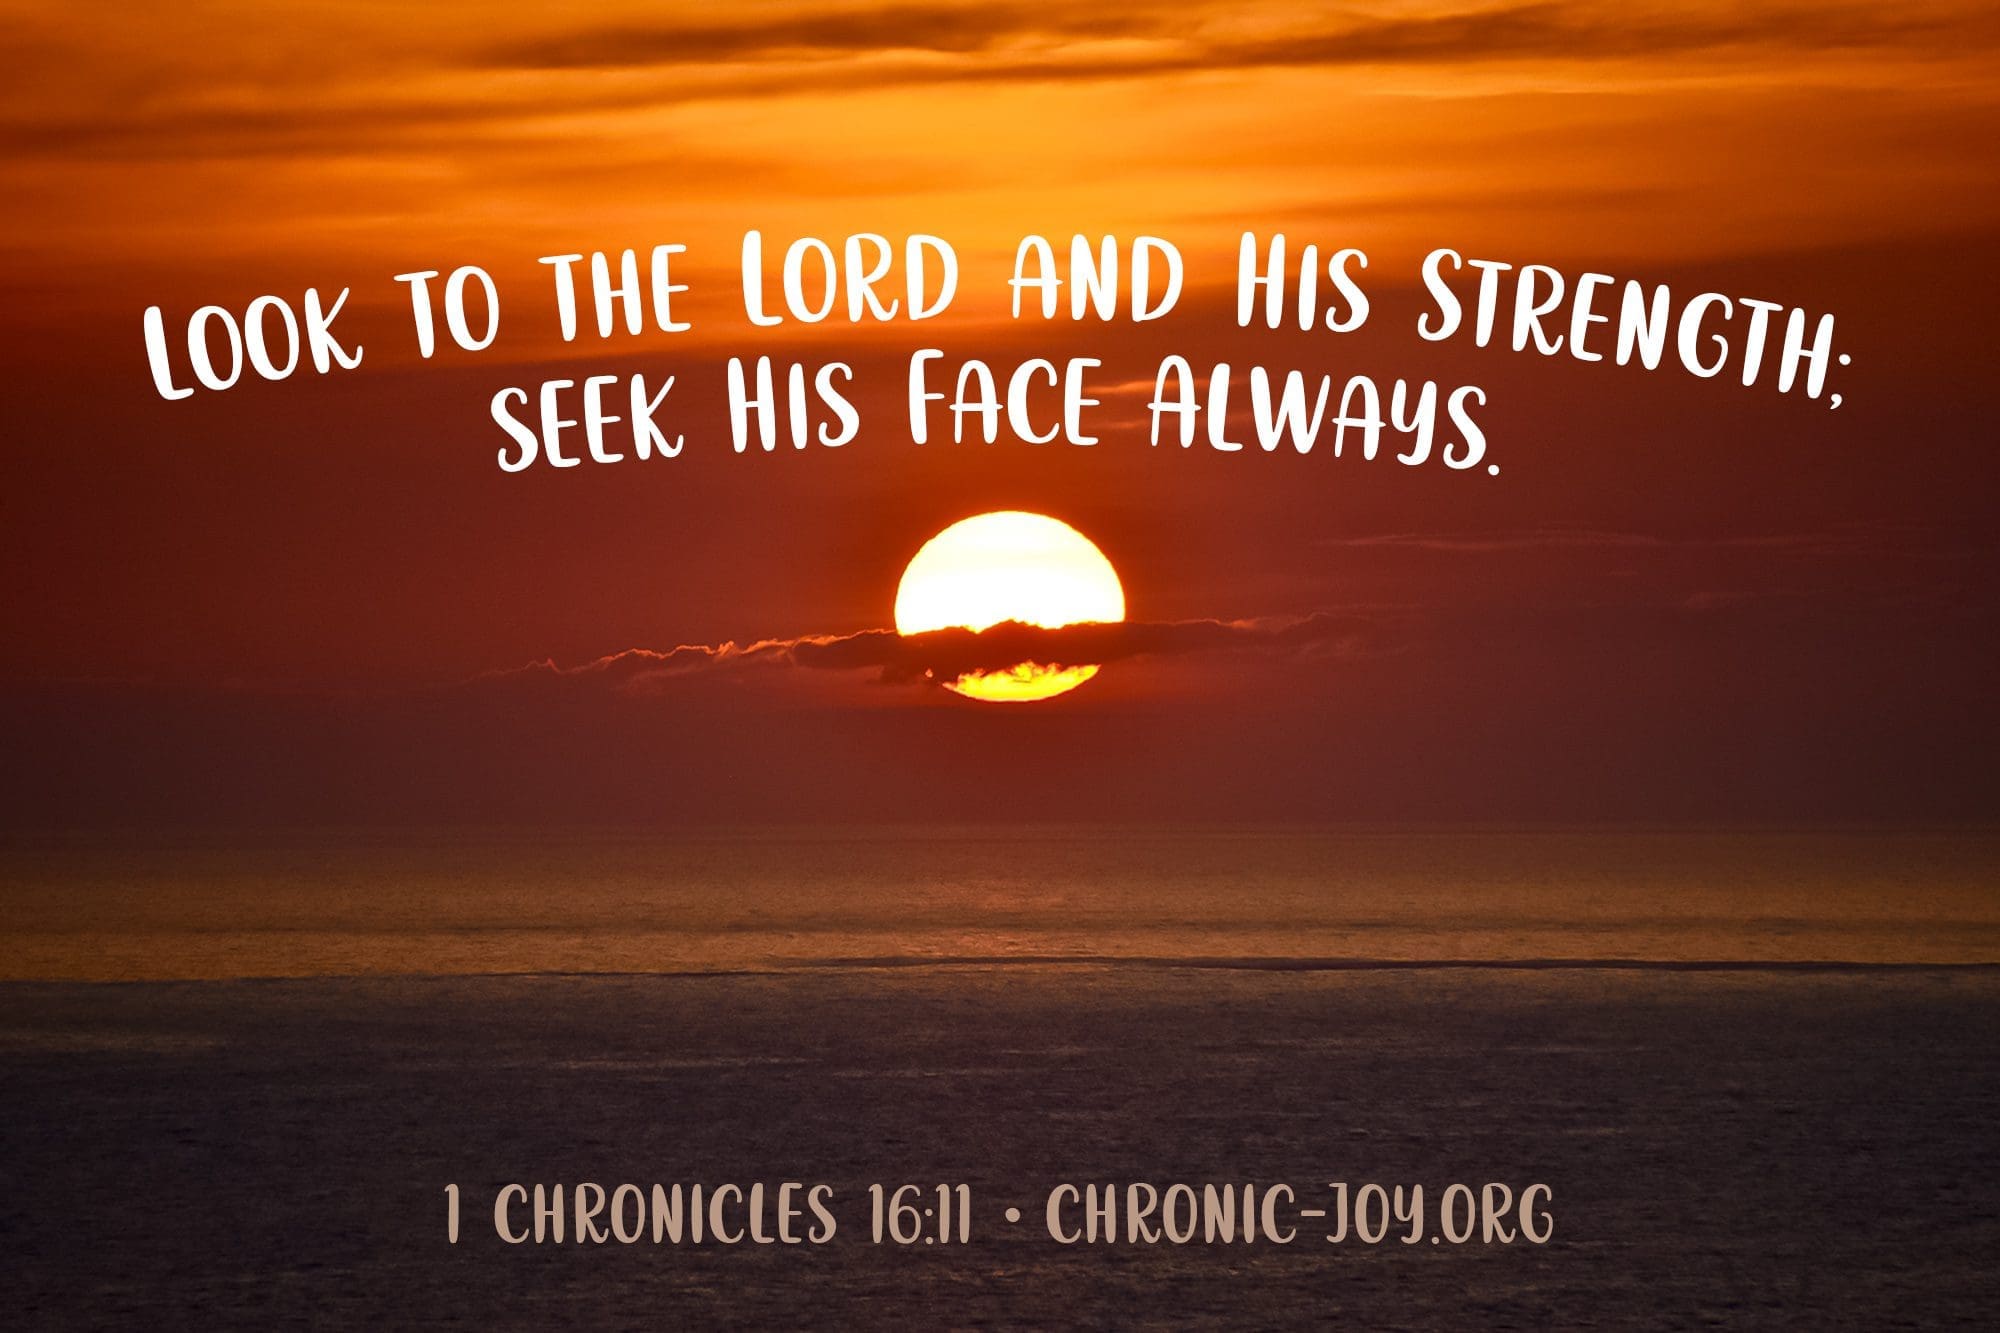 "Look to the Lord and His strength; seek His face always." 1 Chronicles 16:11